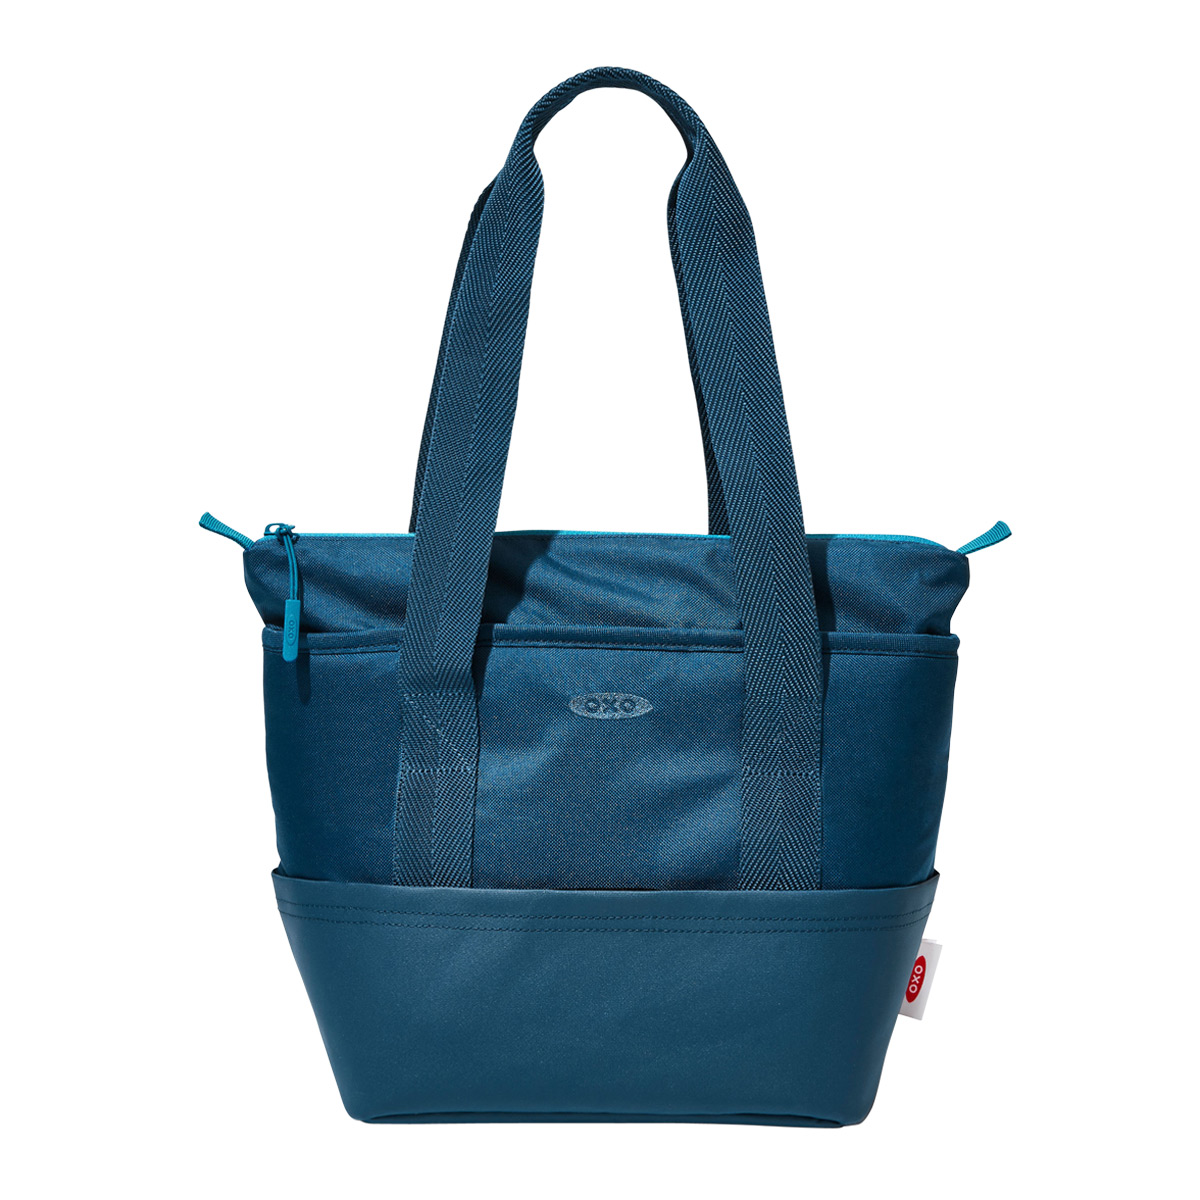 https://www.containerstore.com/catalogimages/421978/10085074-Lunchbag-VEN2.jpg